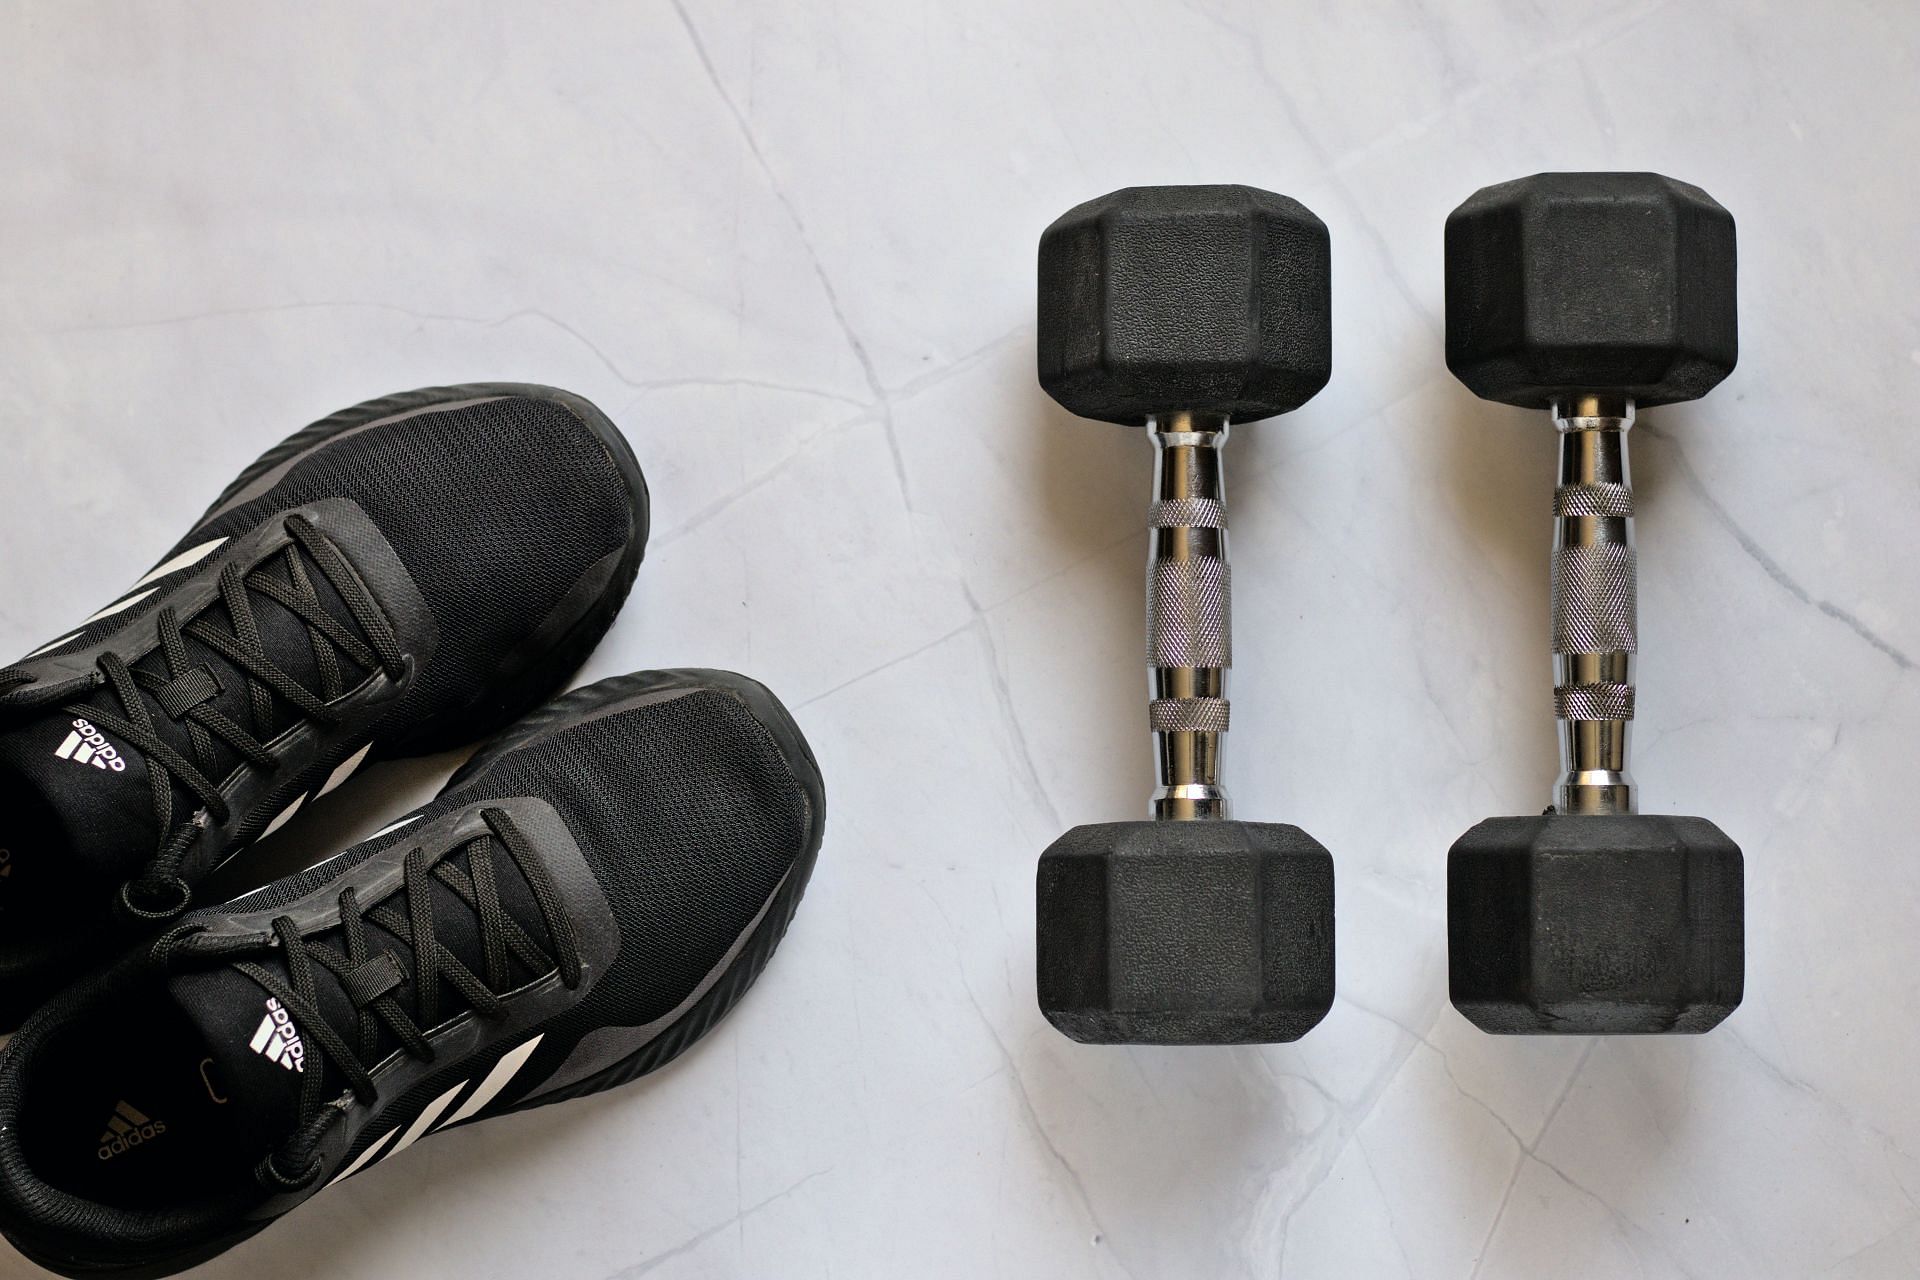 Dumbbell Sumo Squat Exercise: Why You Should Add It to Your Leg Day  Workouts?